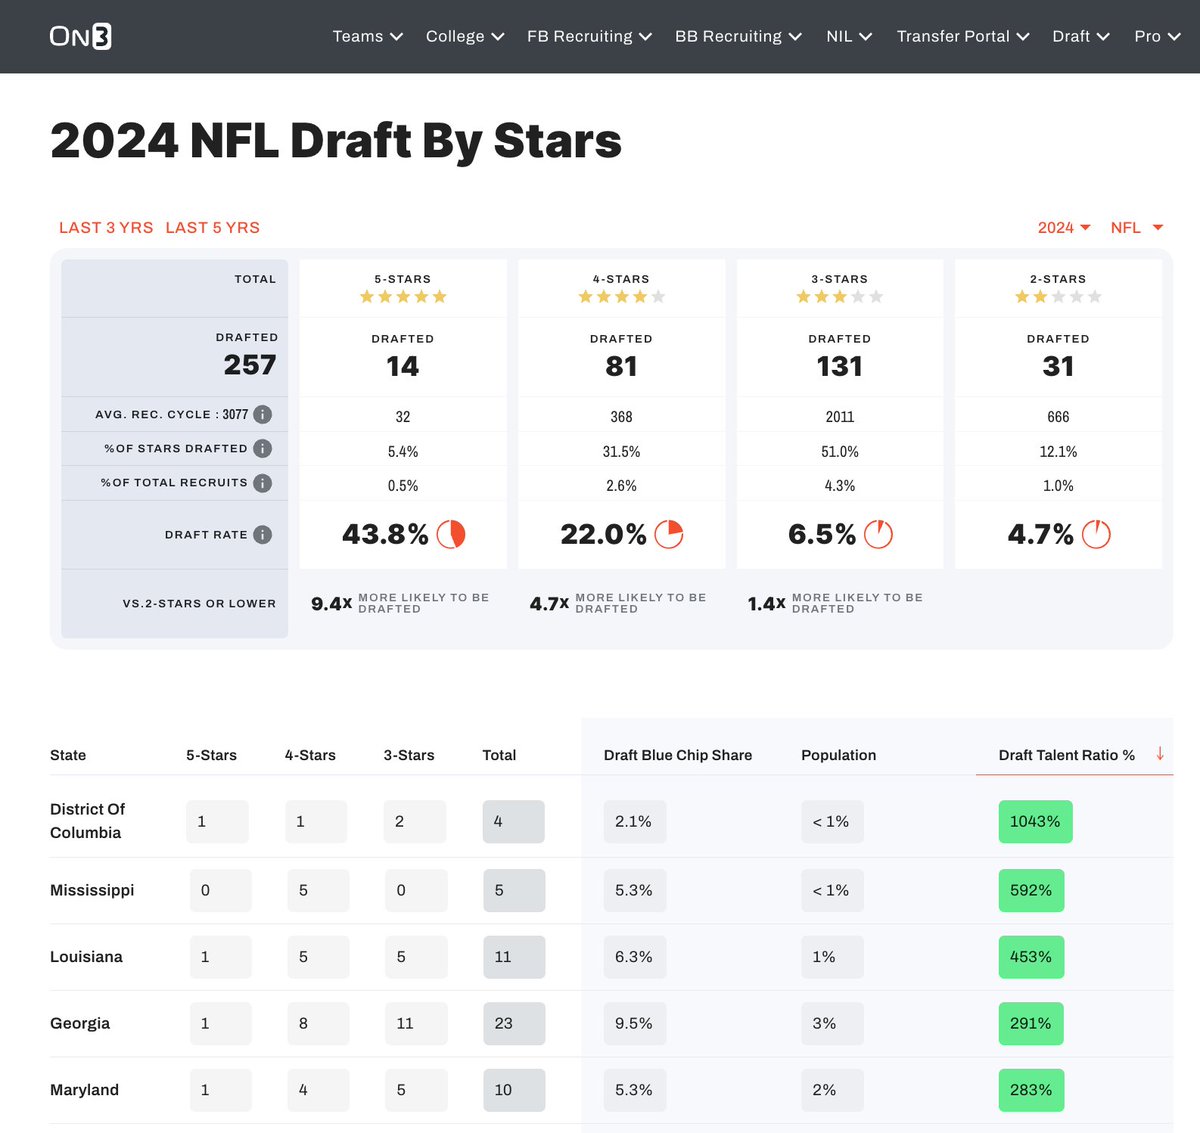 The Draft Talent Ratio by state has been updated, and the states of Mississippi and Louisiana are once again the story. on3.com/nfl/draft/2024…